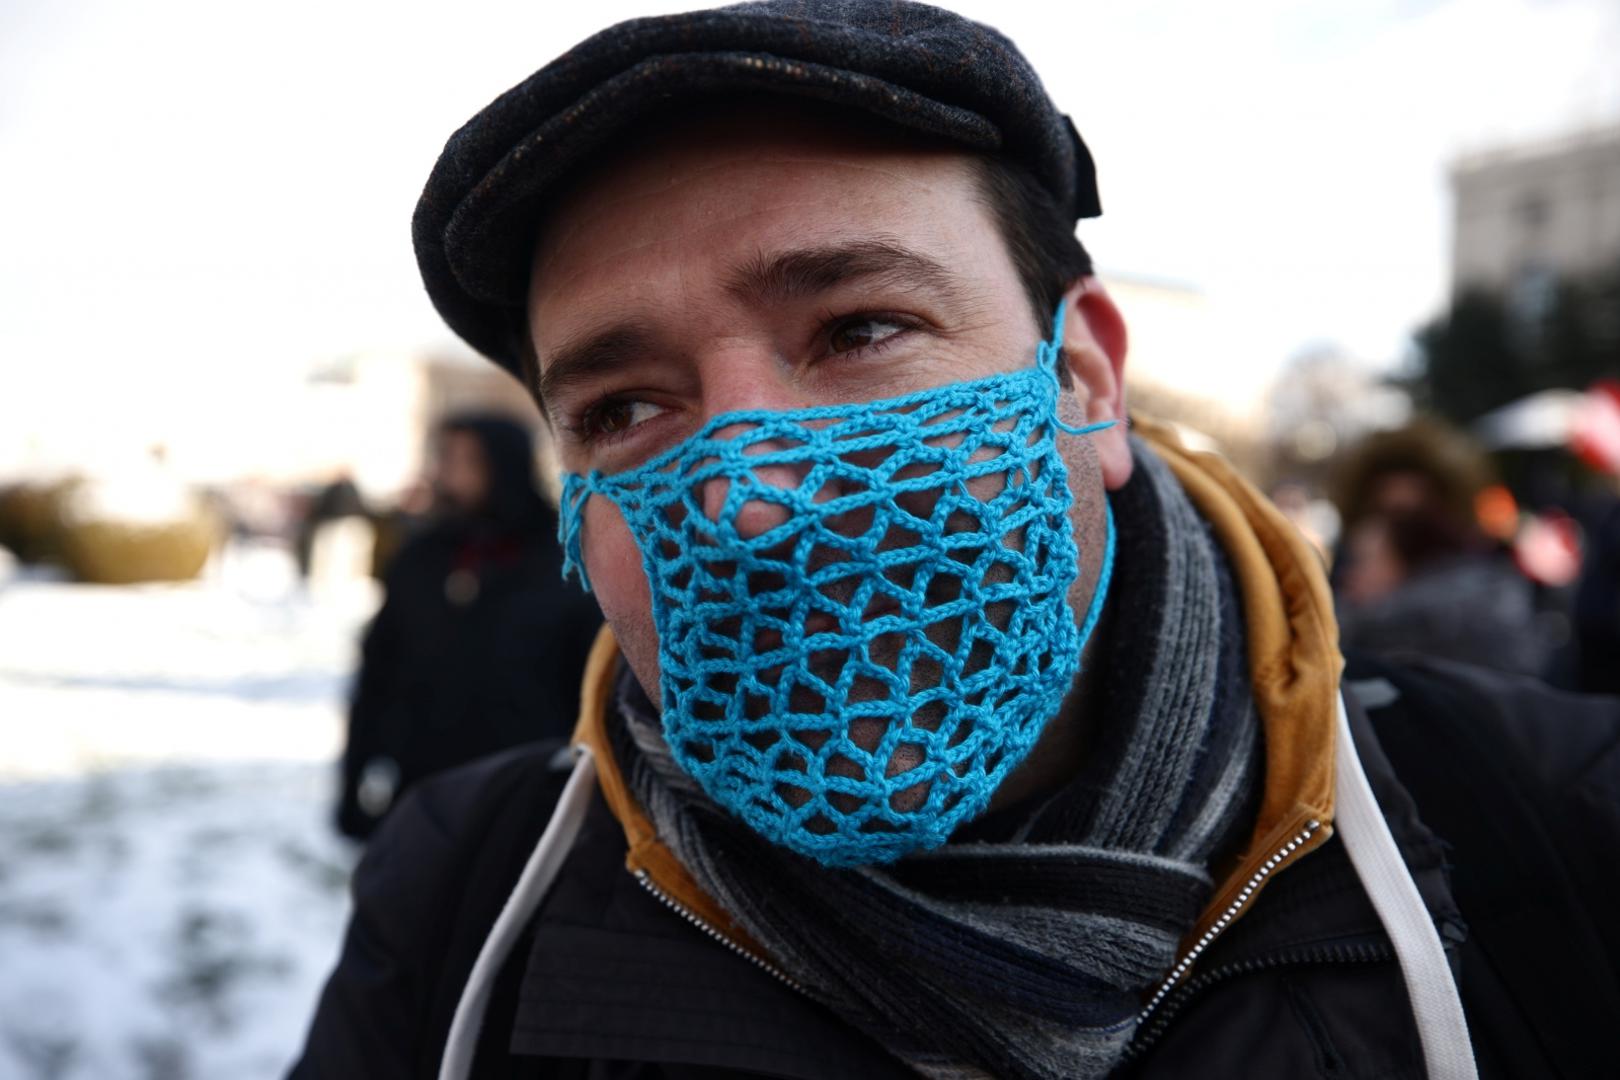 Demonstration against the COVID-19 measures and their economic consequences, in Vienna A protester attends a demonstration against the coronavirus disease (COVID-19) measures and their economic consequences in Vienna, Austria, January 16, 2021. REUTERS/Lisi Niesner LISI NIESNER